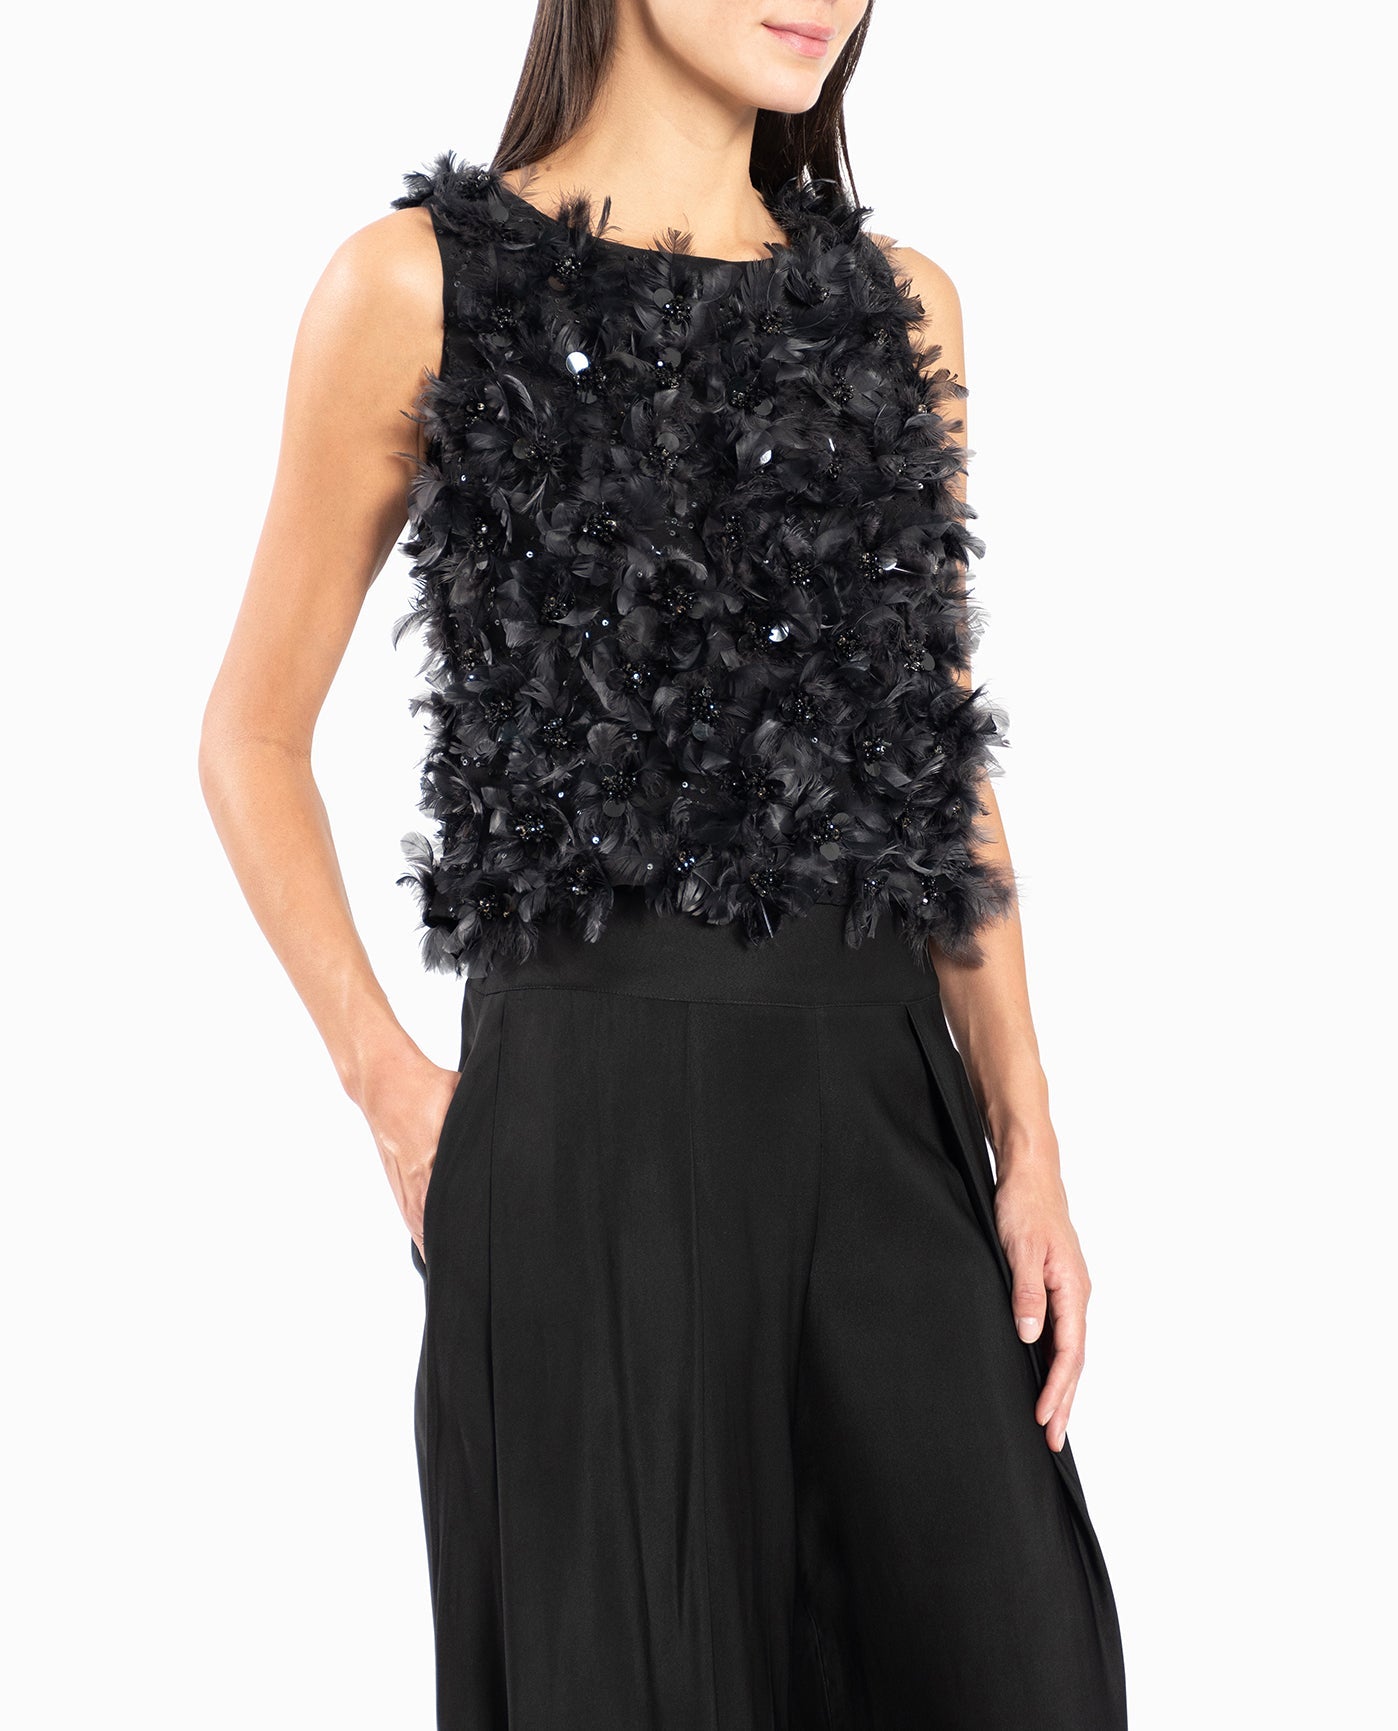 SIDE OF FEATHERED FLORAL SLEVELESS TOP | Black Feather